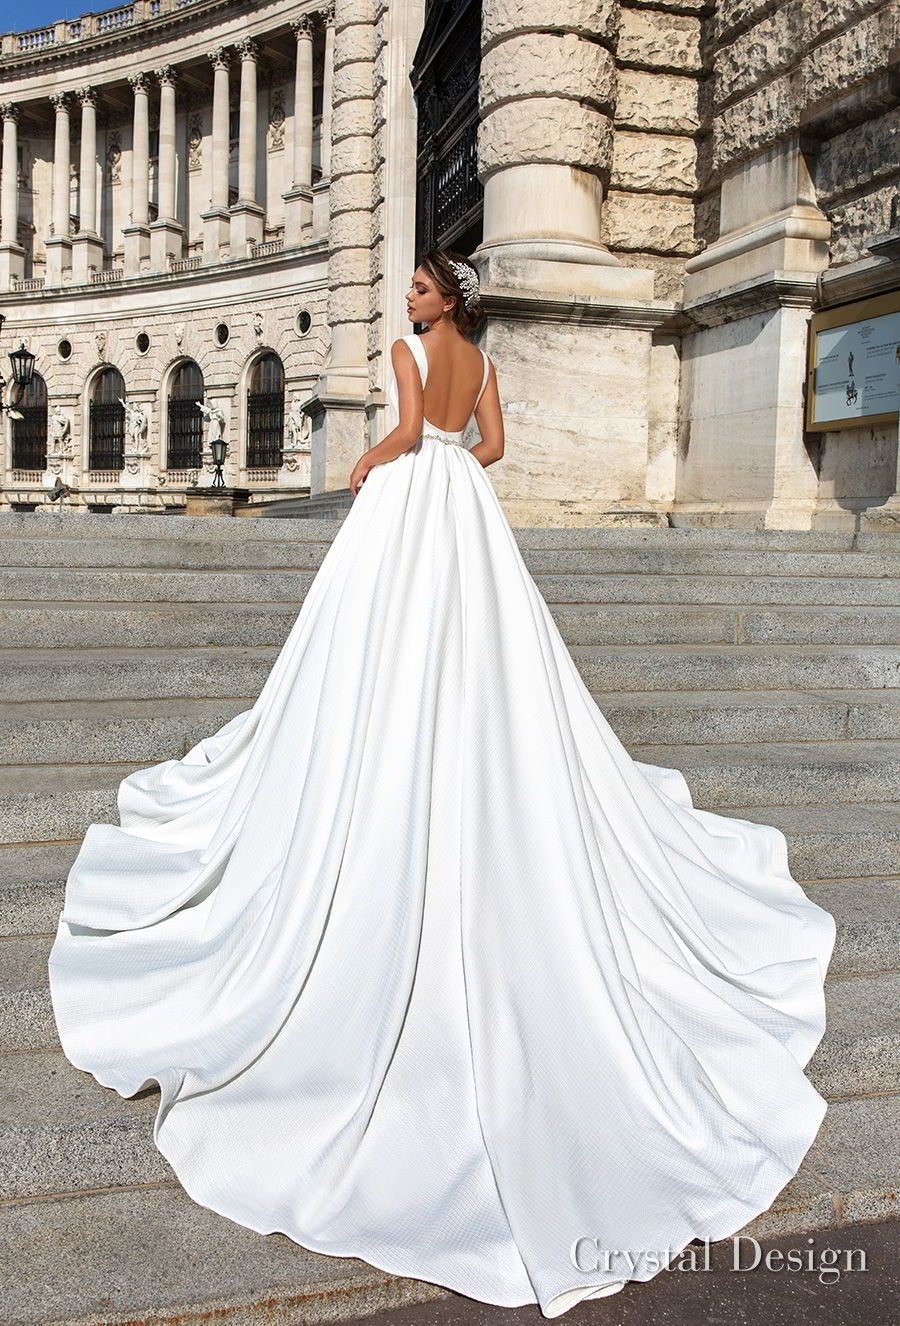 Fast Shipping Wedding Dresses 2019 Newest Design Elegant High Neck Tassel  Crystal Ball Gown Wedding Gowns With Shiny Long Train Bridal Gown Ball Gown